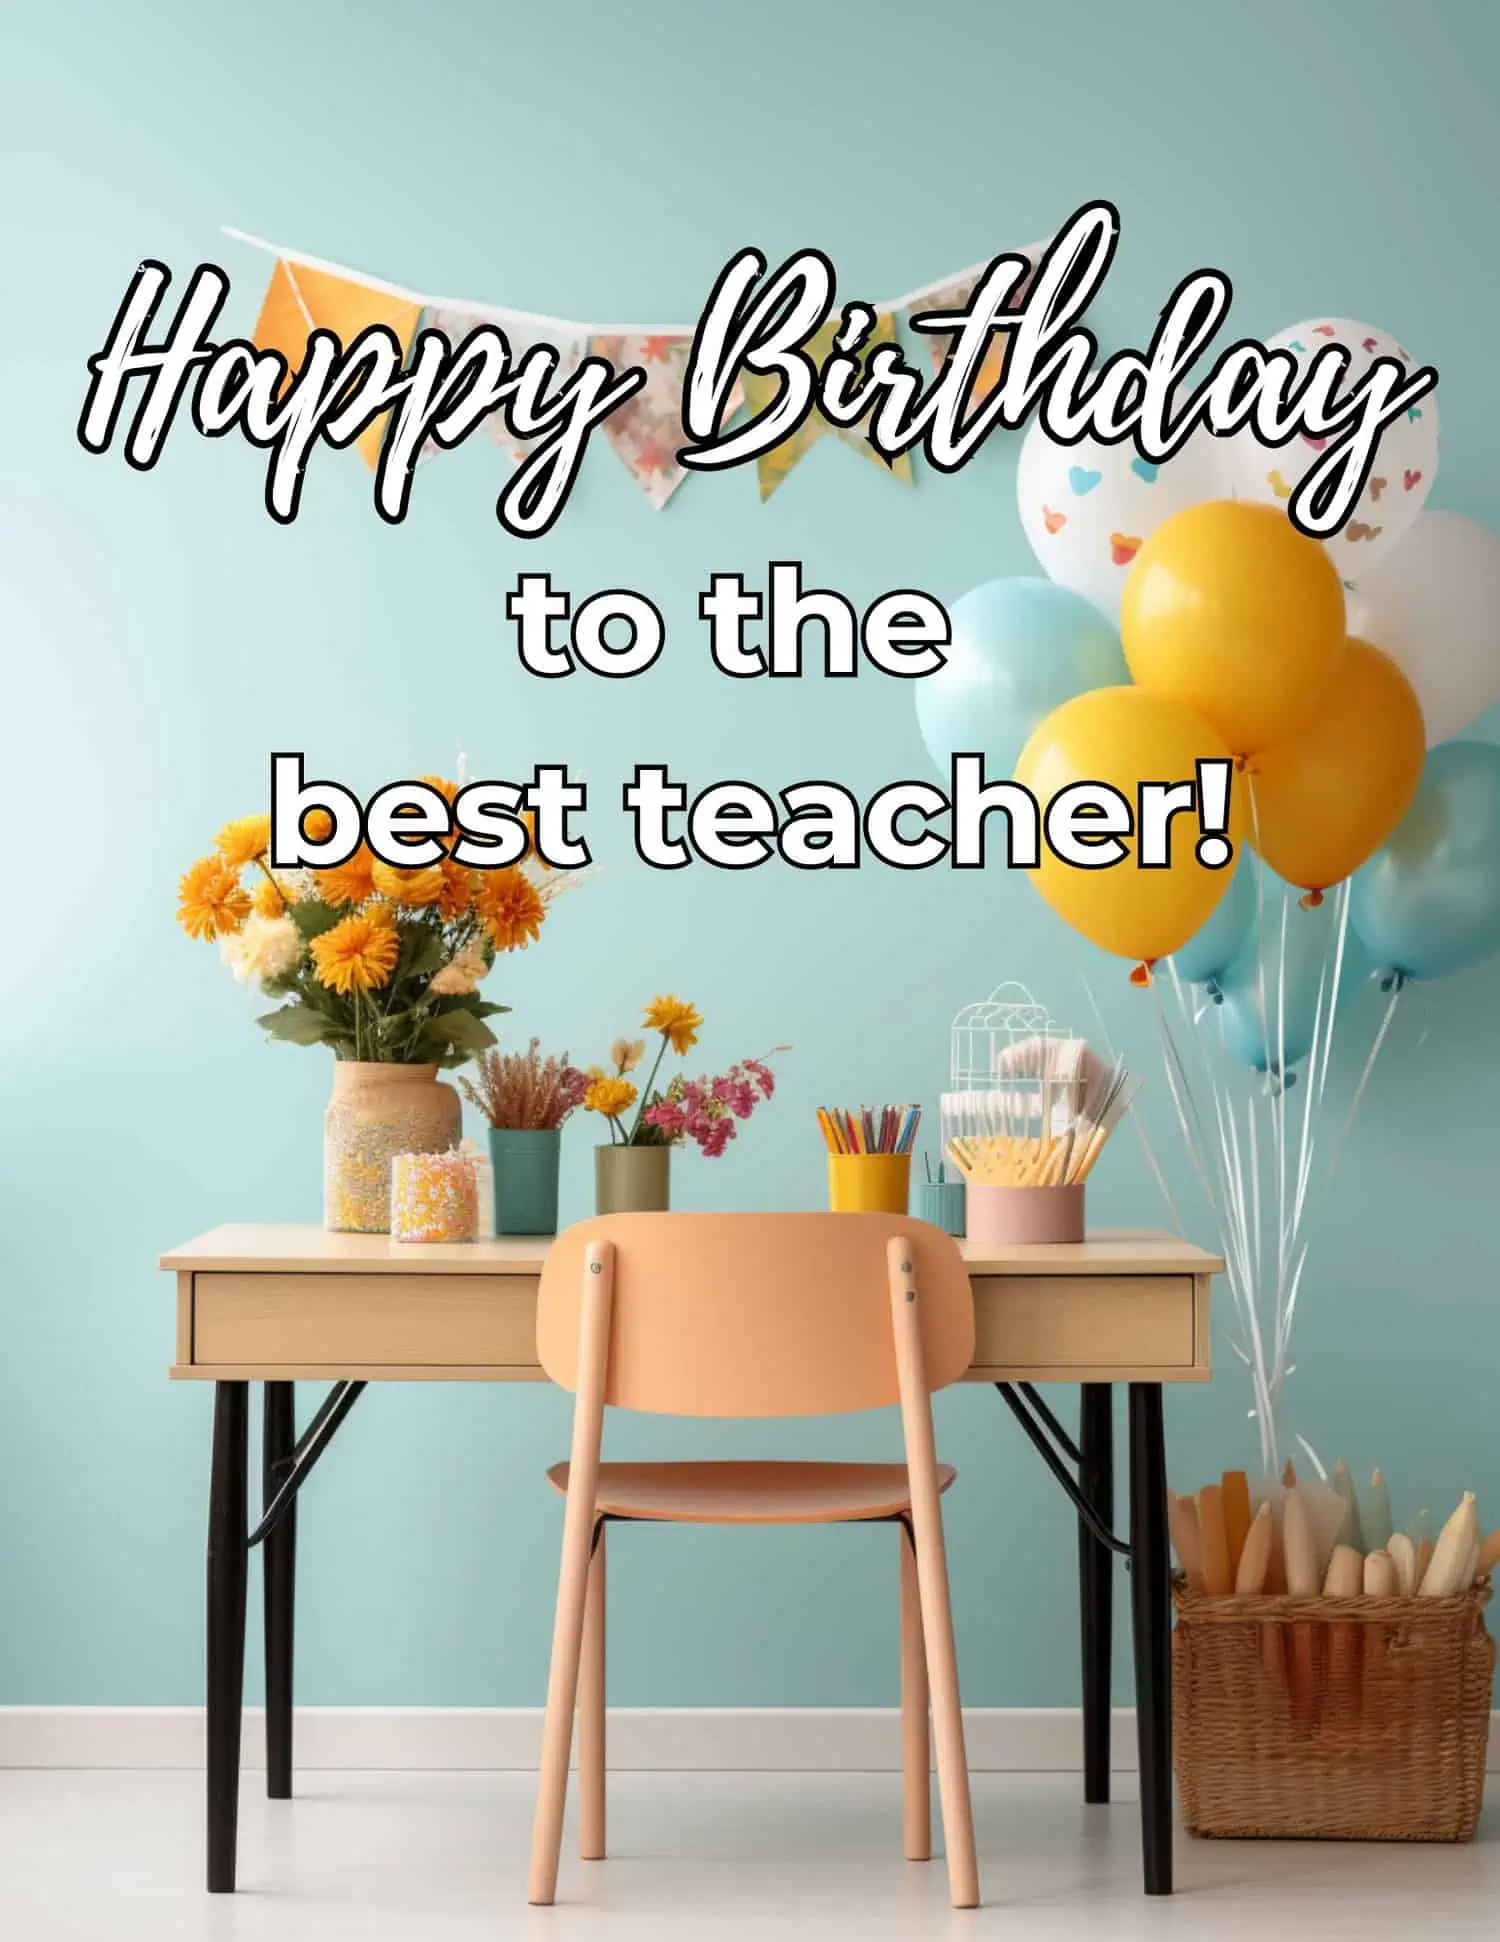 Uncomplicated and genuine birthday messages for educators.